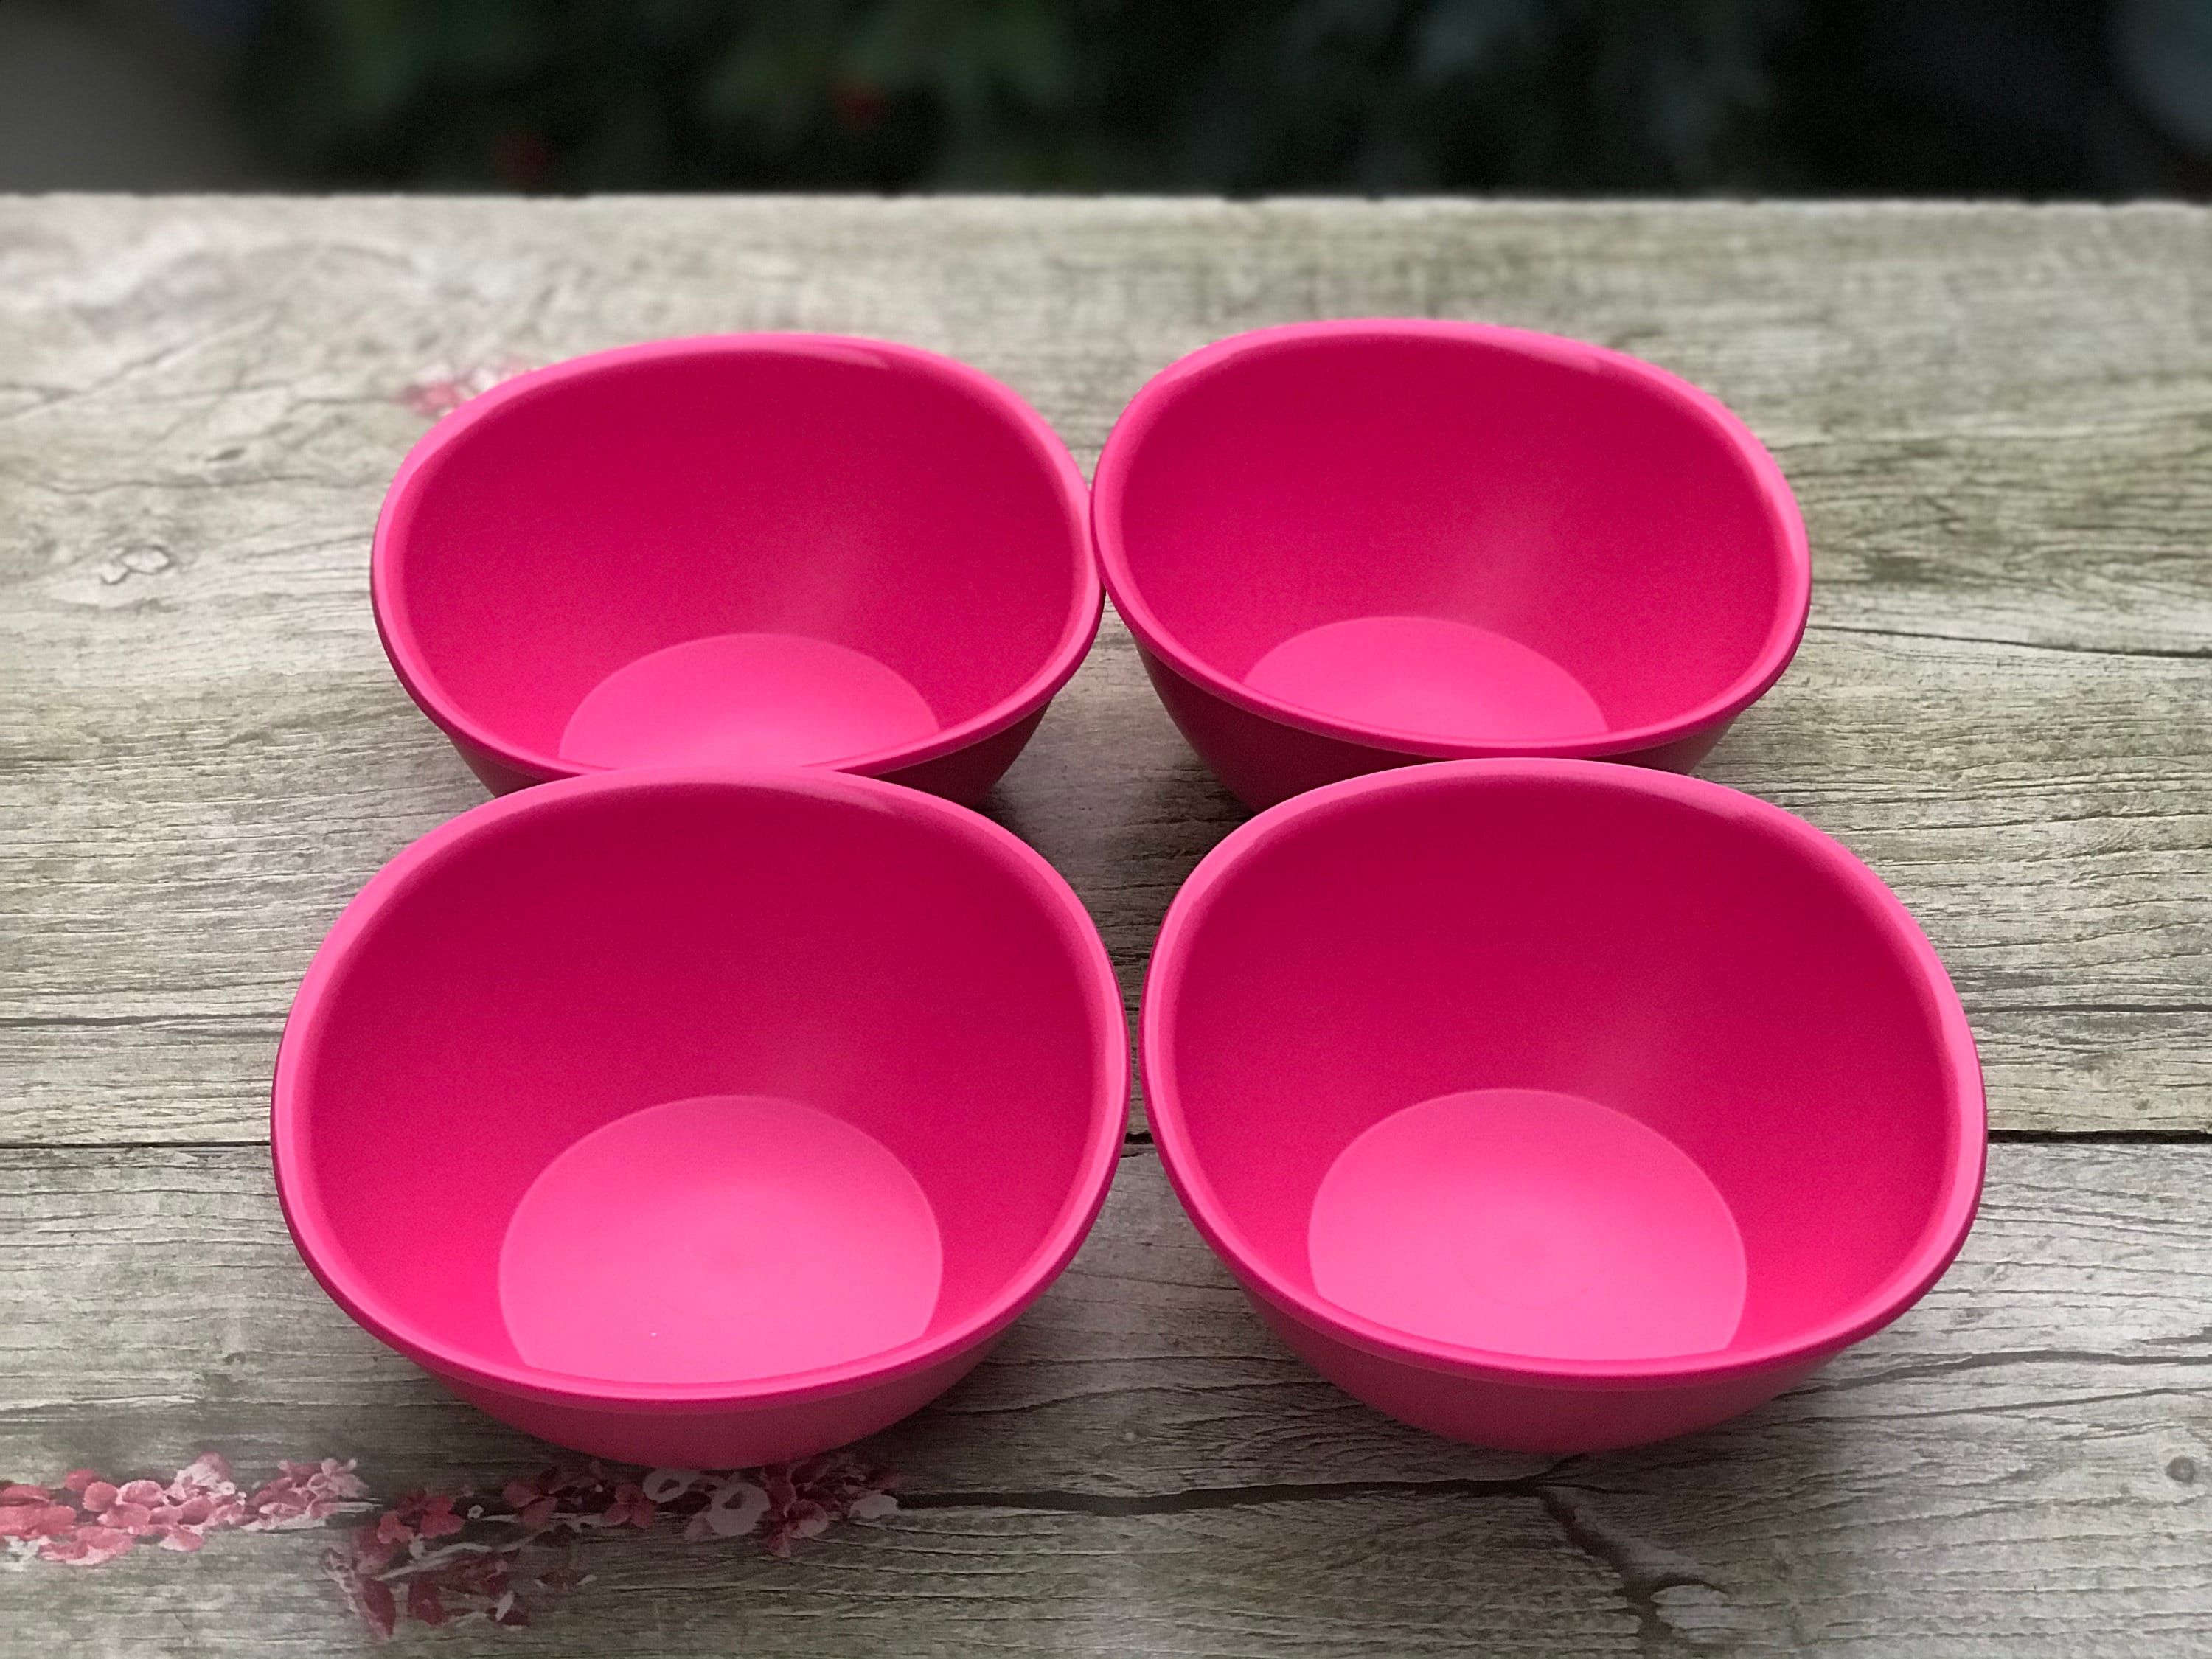 Tupperware Servalier Bowls Set of 5 Shades of Pink Stacking Brand New